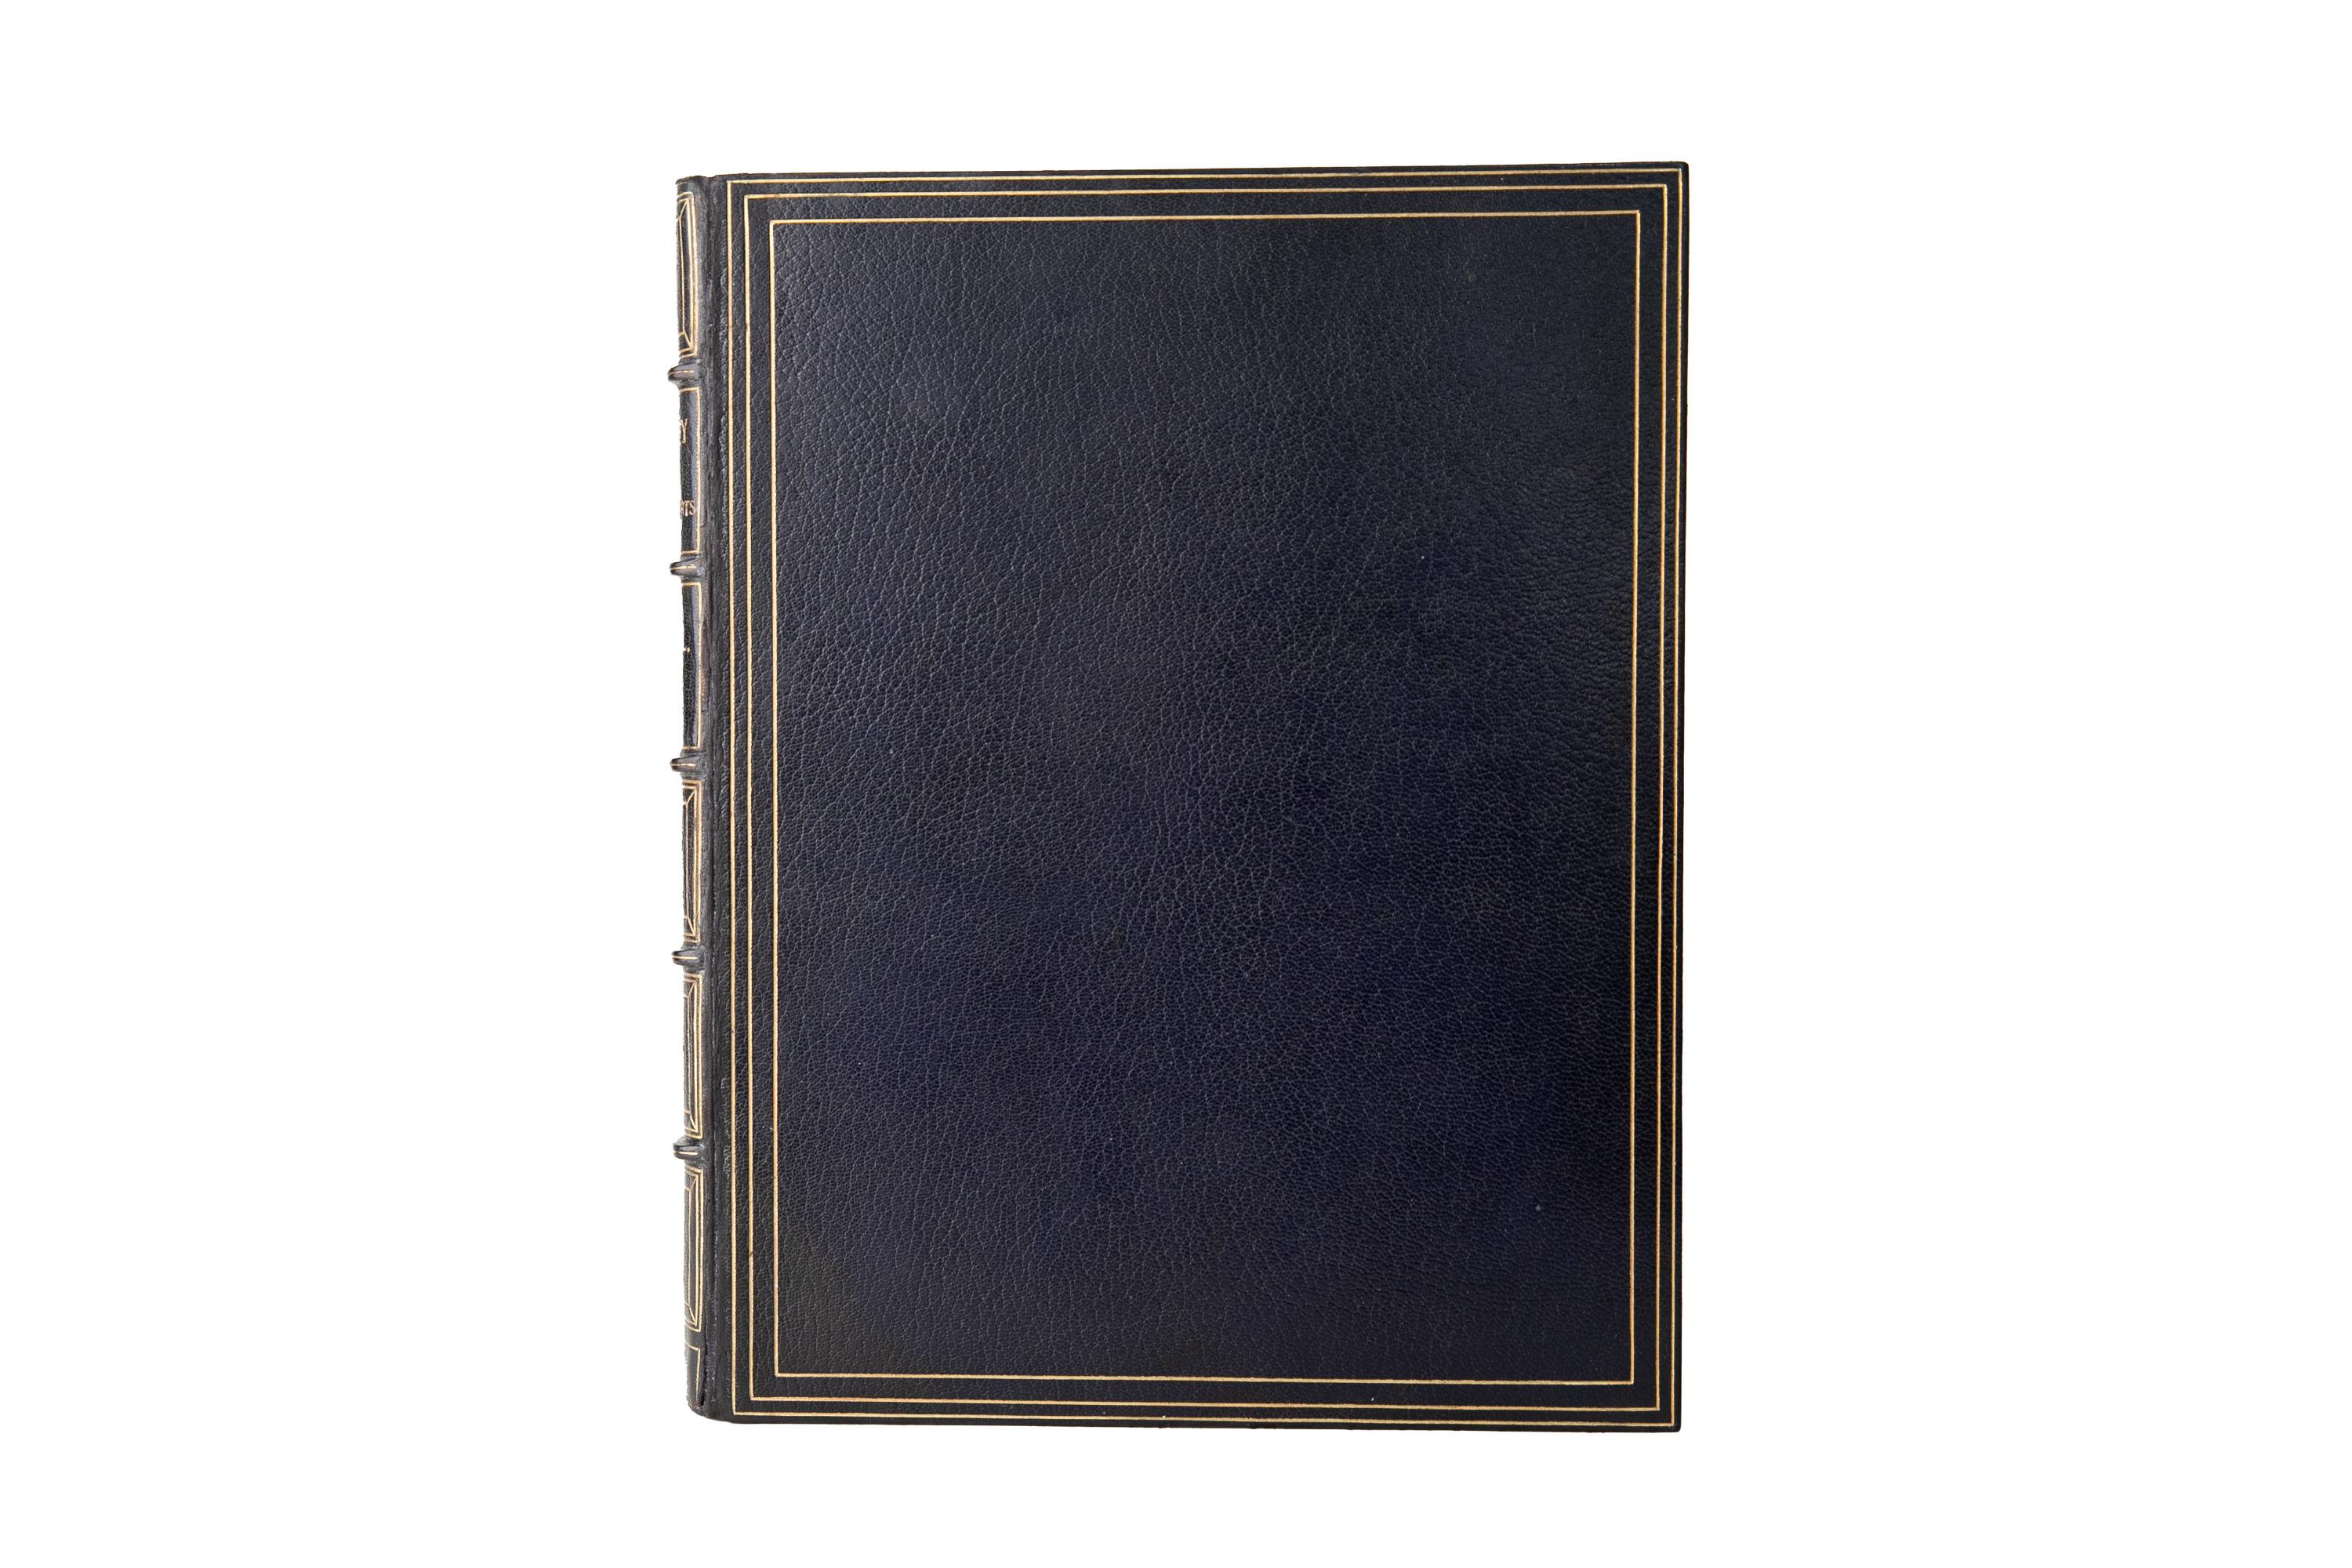 2 Volumes. Humphrey Ward & W. Roberts, Romney. Bound by Bickers & Son in full navy morocco with the covers displaying a gilt-tooled border. The spines display raised bands, bordering, and label lettering, all gilt-tooled. The top edges are gilded